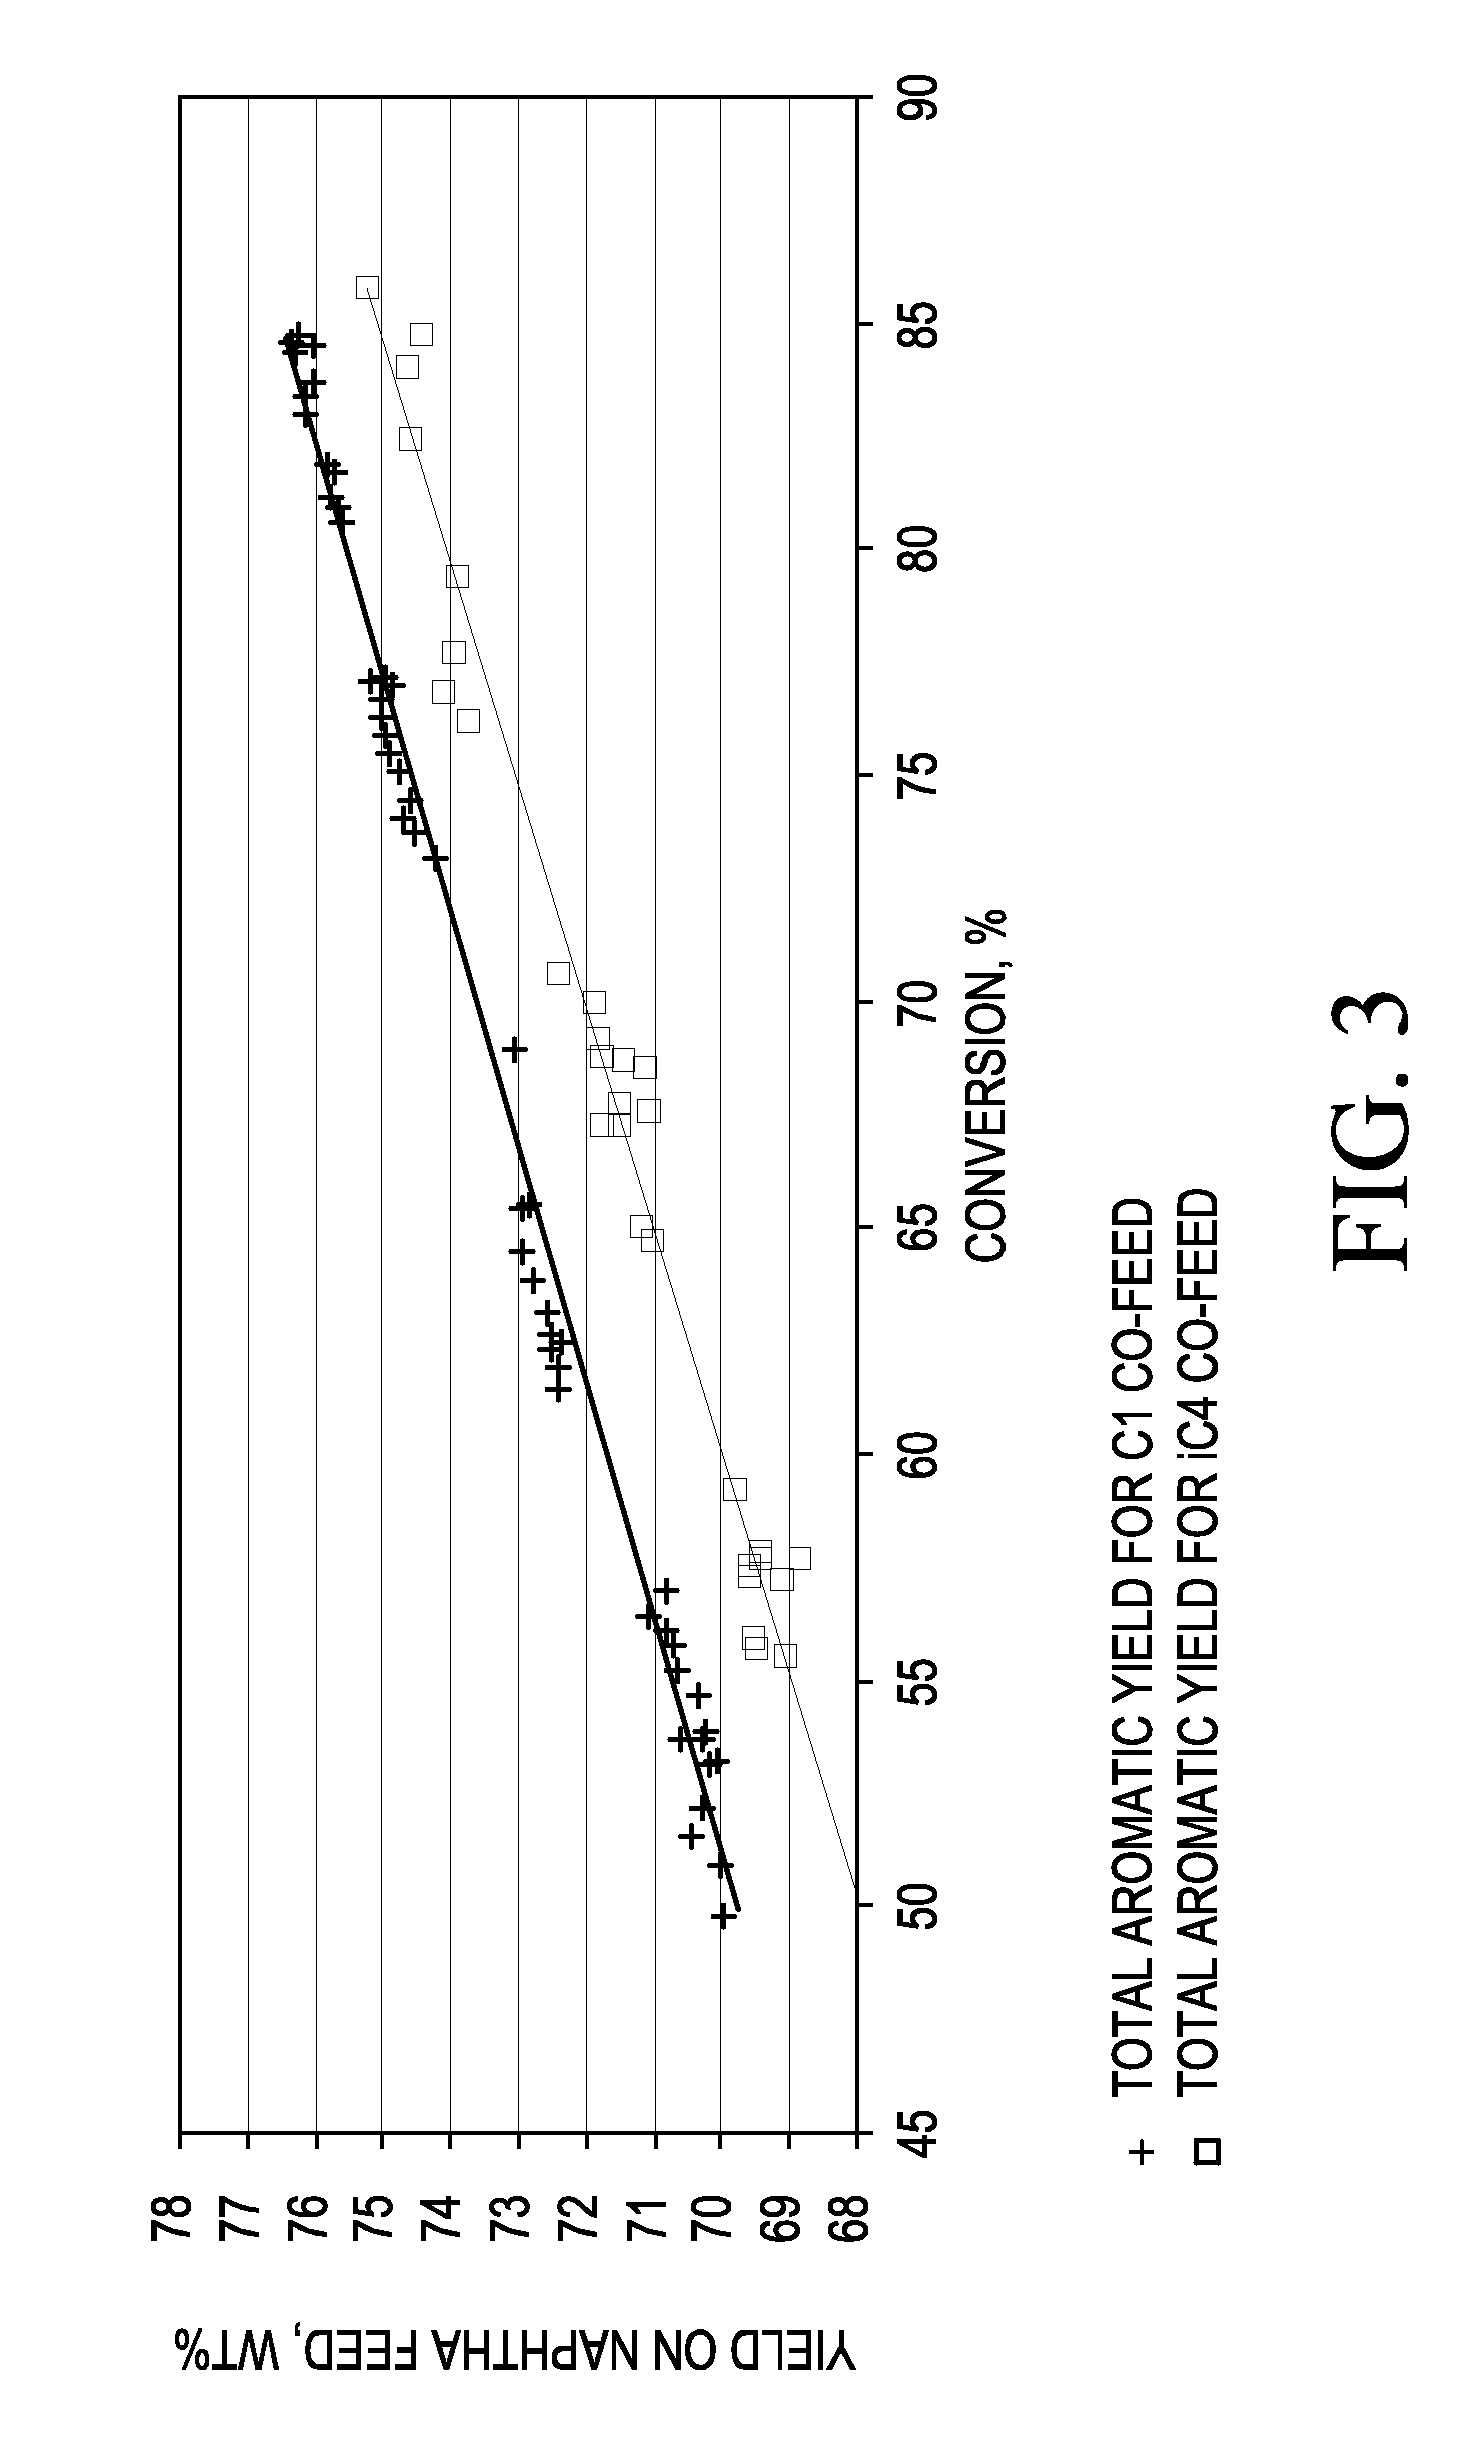 PROCESS AND APPARATUS FOR PRODUCING A REFORMATE BY INTRODUCING n-BUTANE